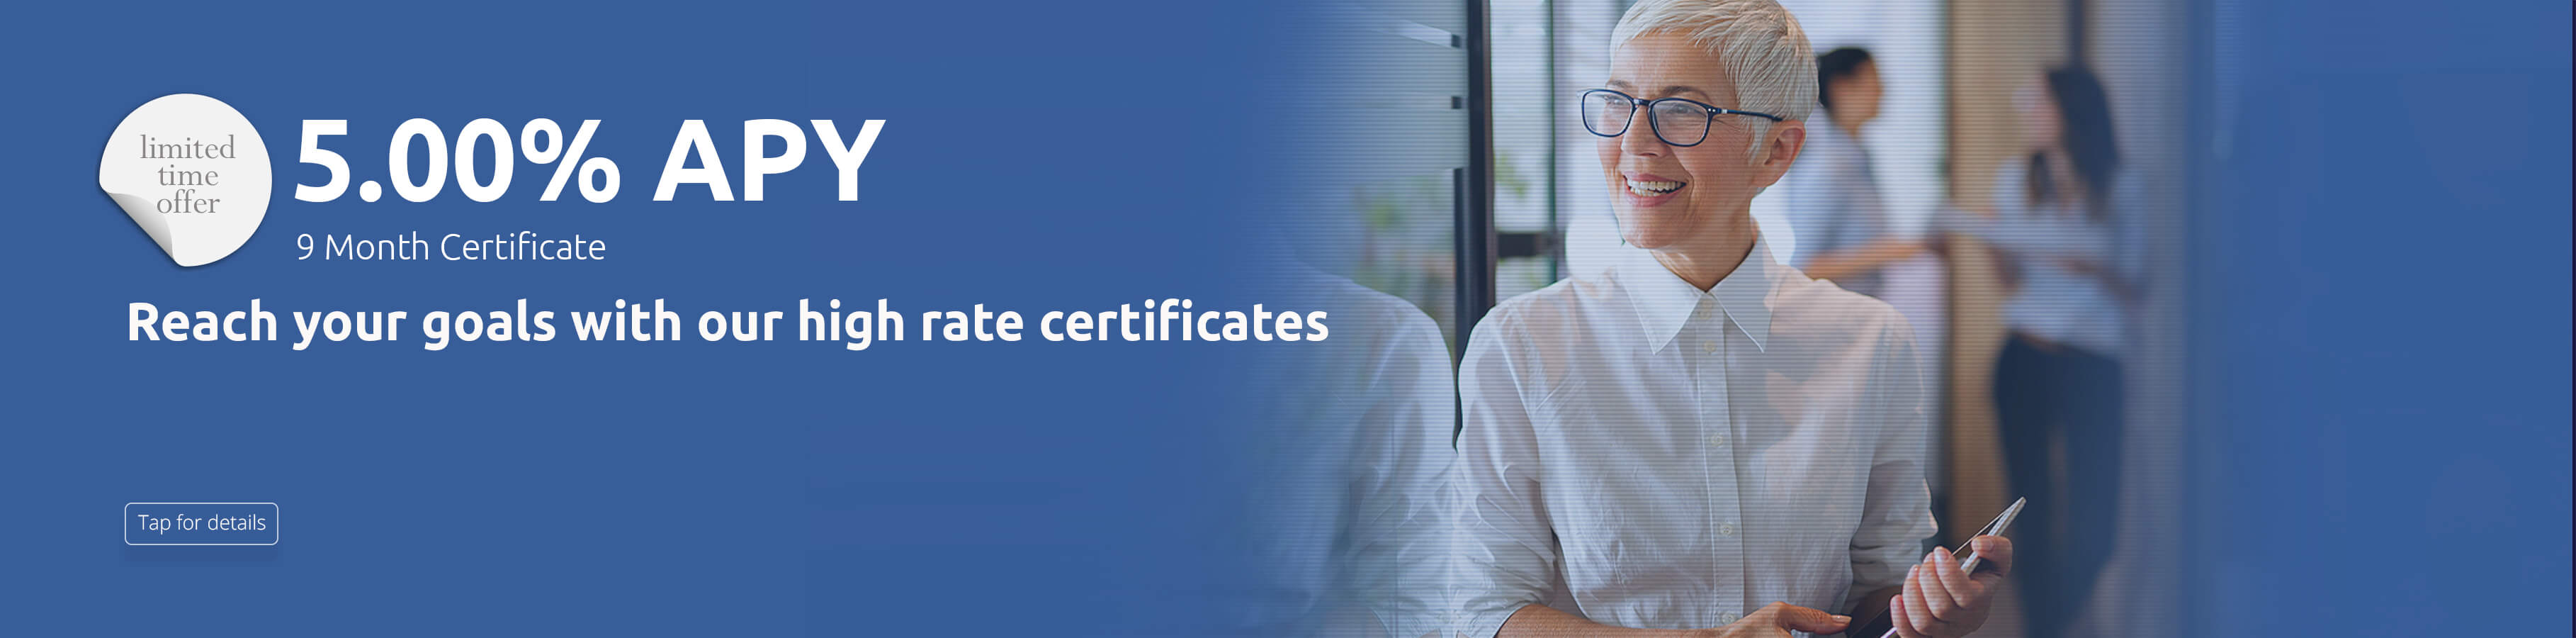 5.00% APY 9 month certificate. Reach your goals with our high rate certificates 